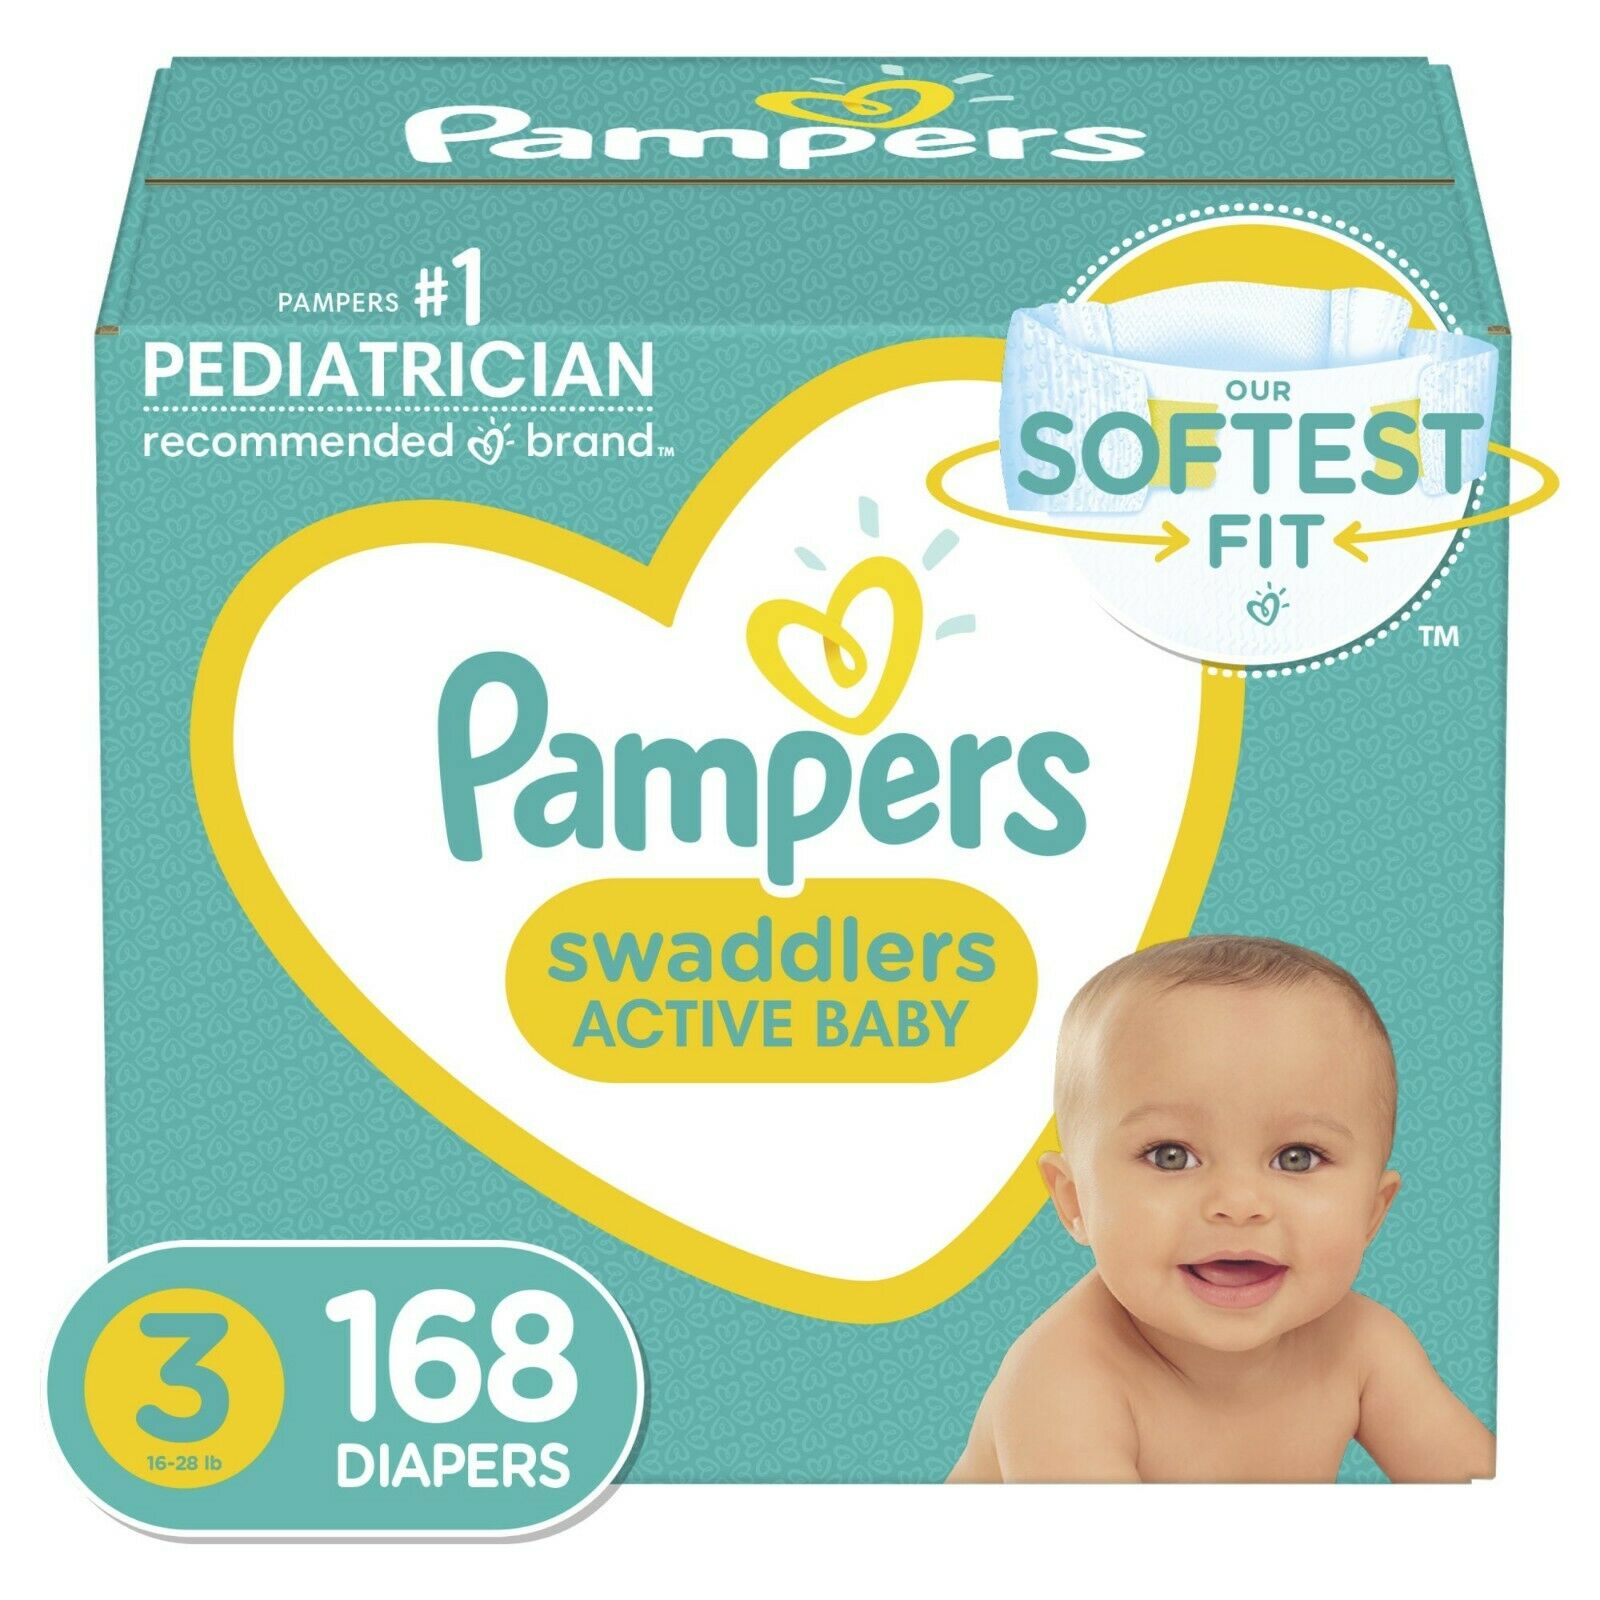 Pampers Swaddlers Newborn Diapers, Soft and Absorbent, Size 3, 136 Ct, 168 Count